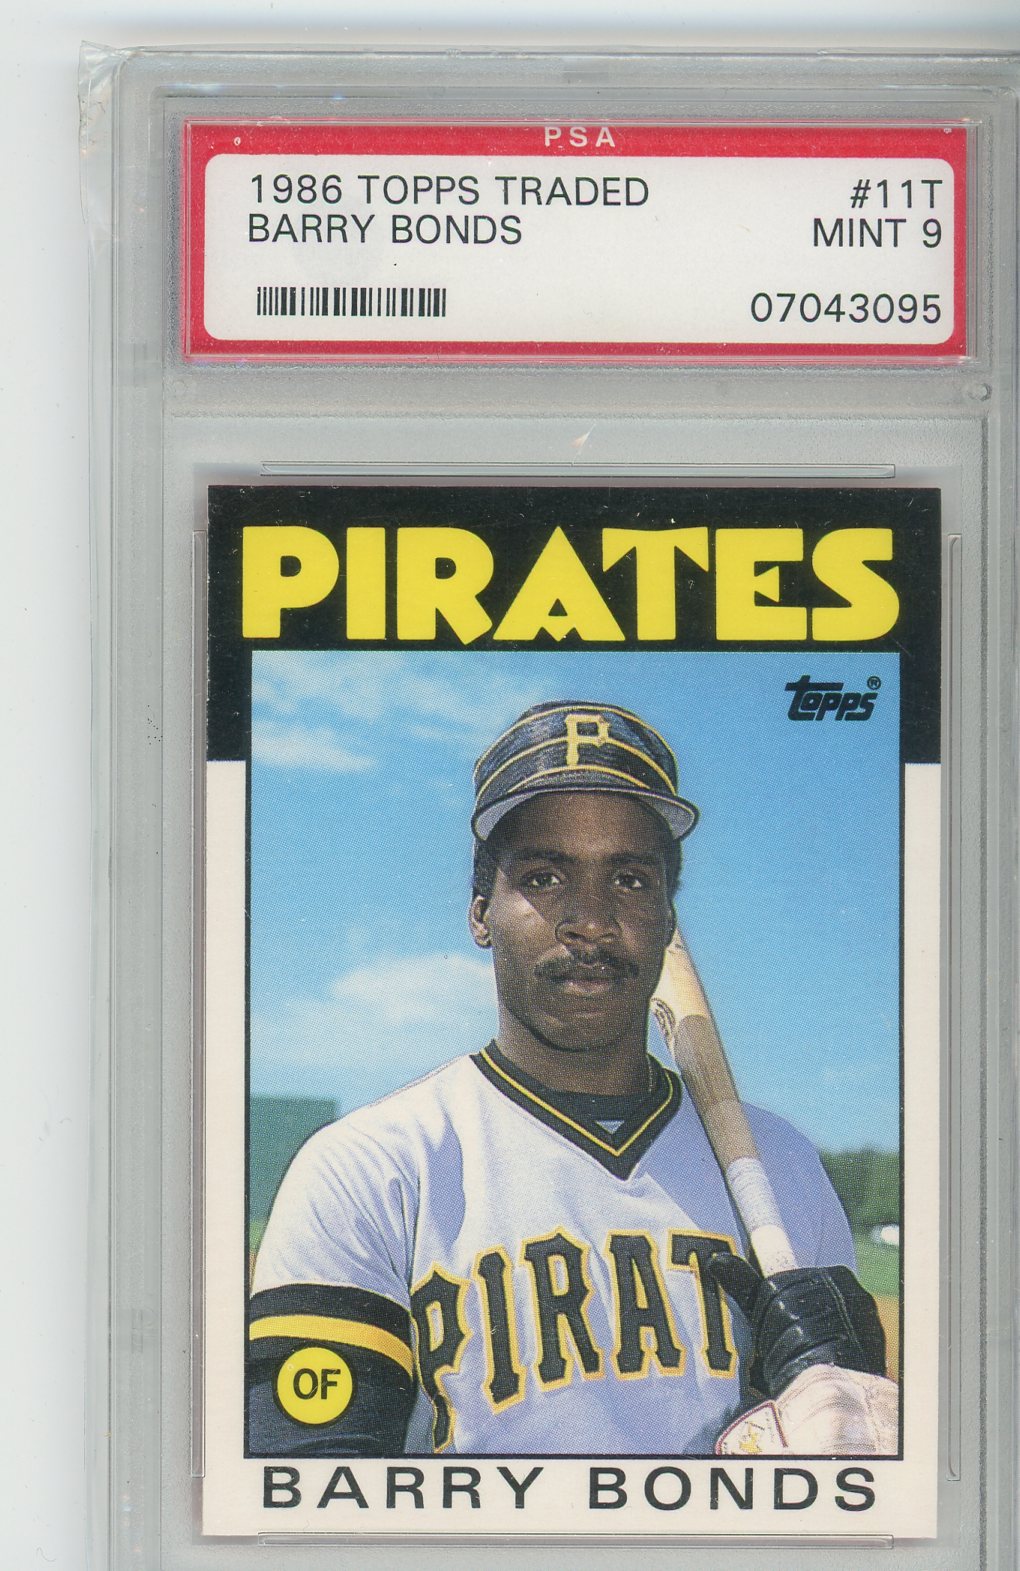 1986 Topps Traded Barry Bonds #11T Card PSA 9